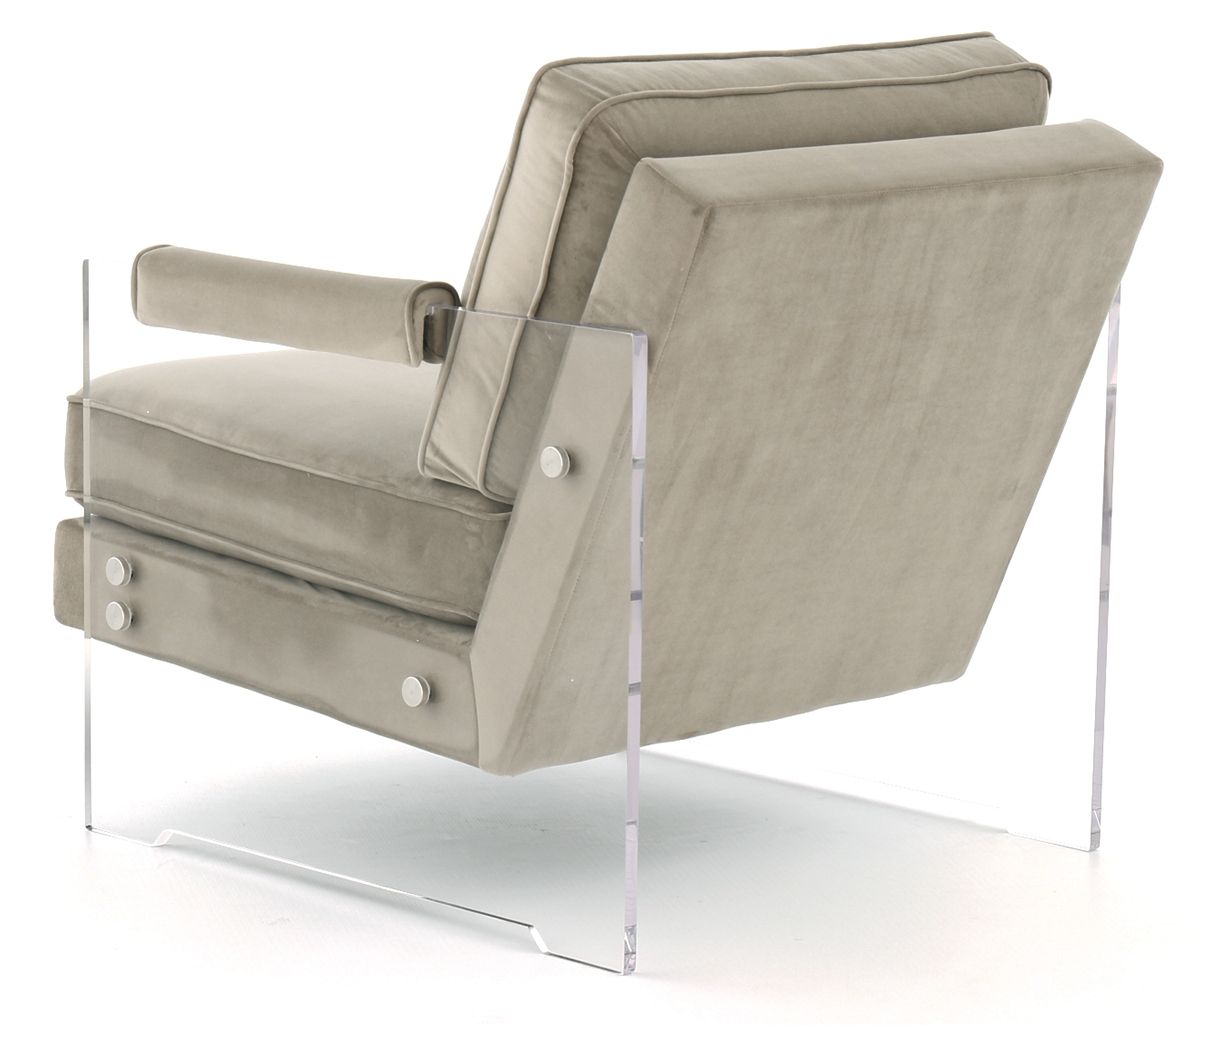 Avonley - Taupe - Accent Chair